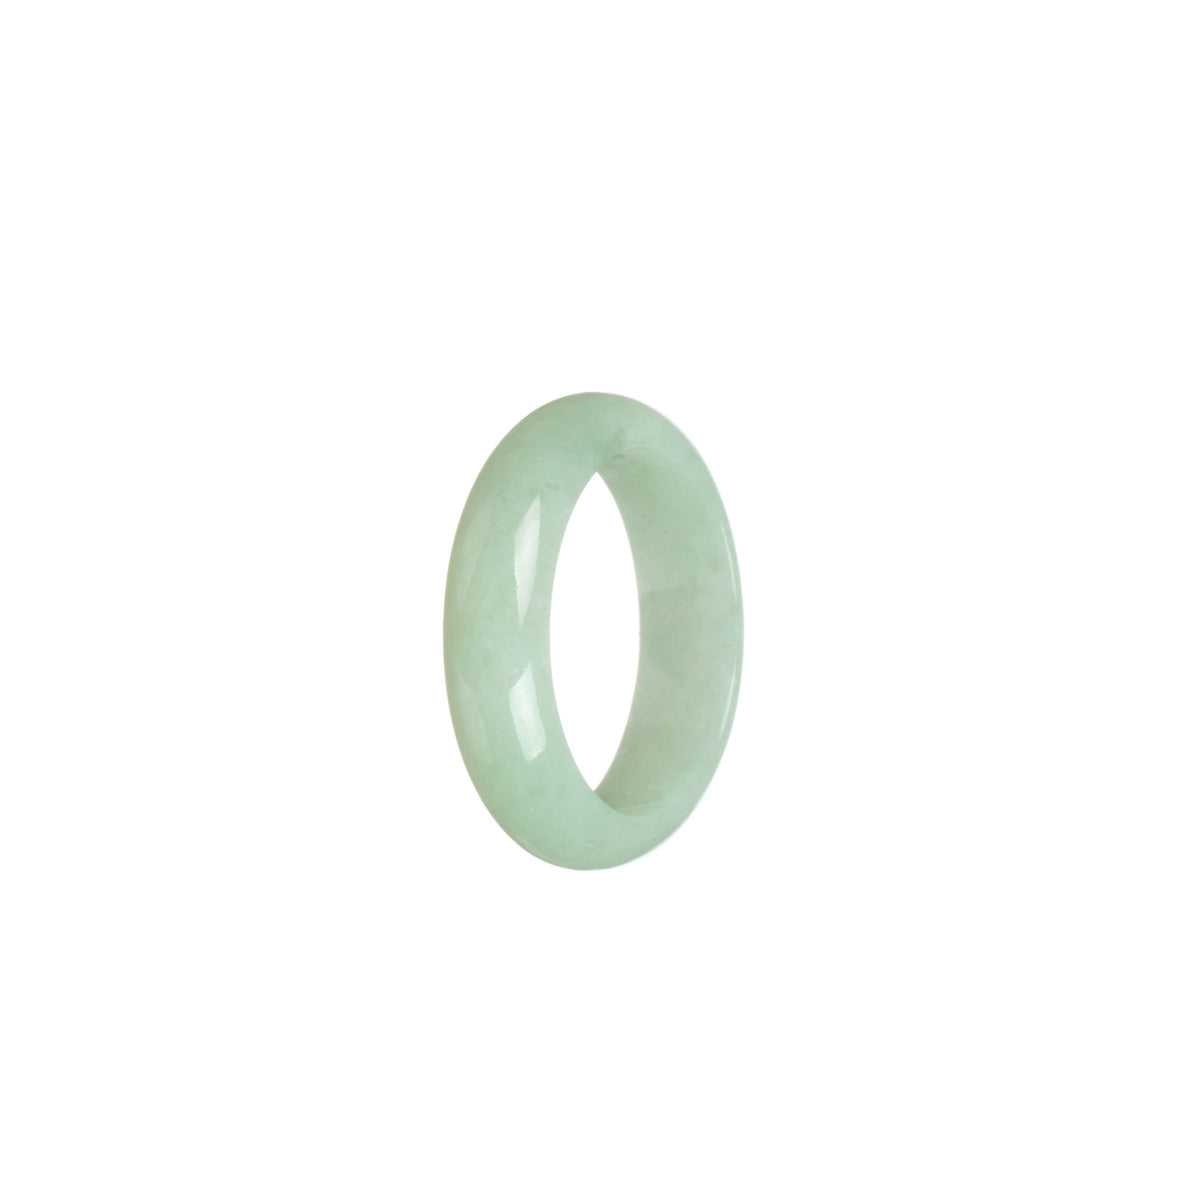 Authentic Light Green Burmese Jade Band - Size S 1/2